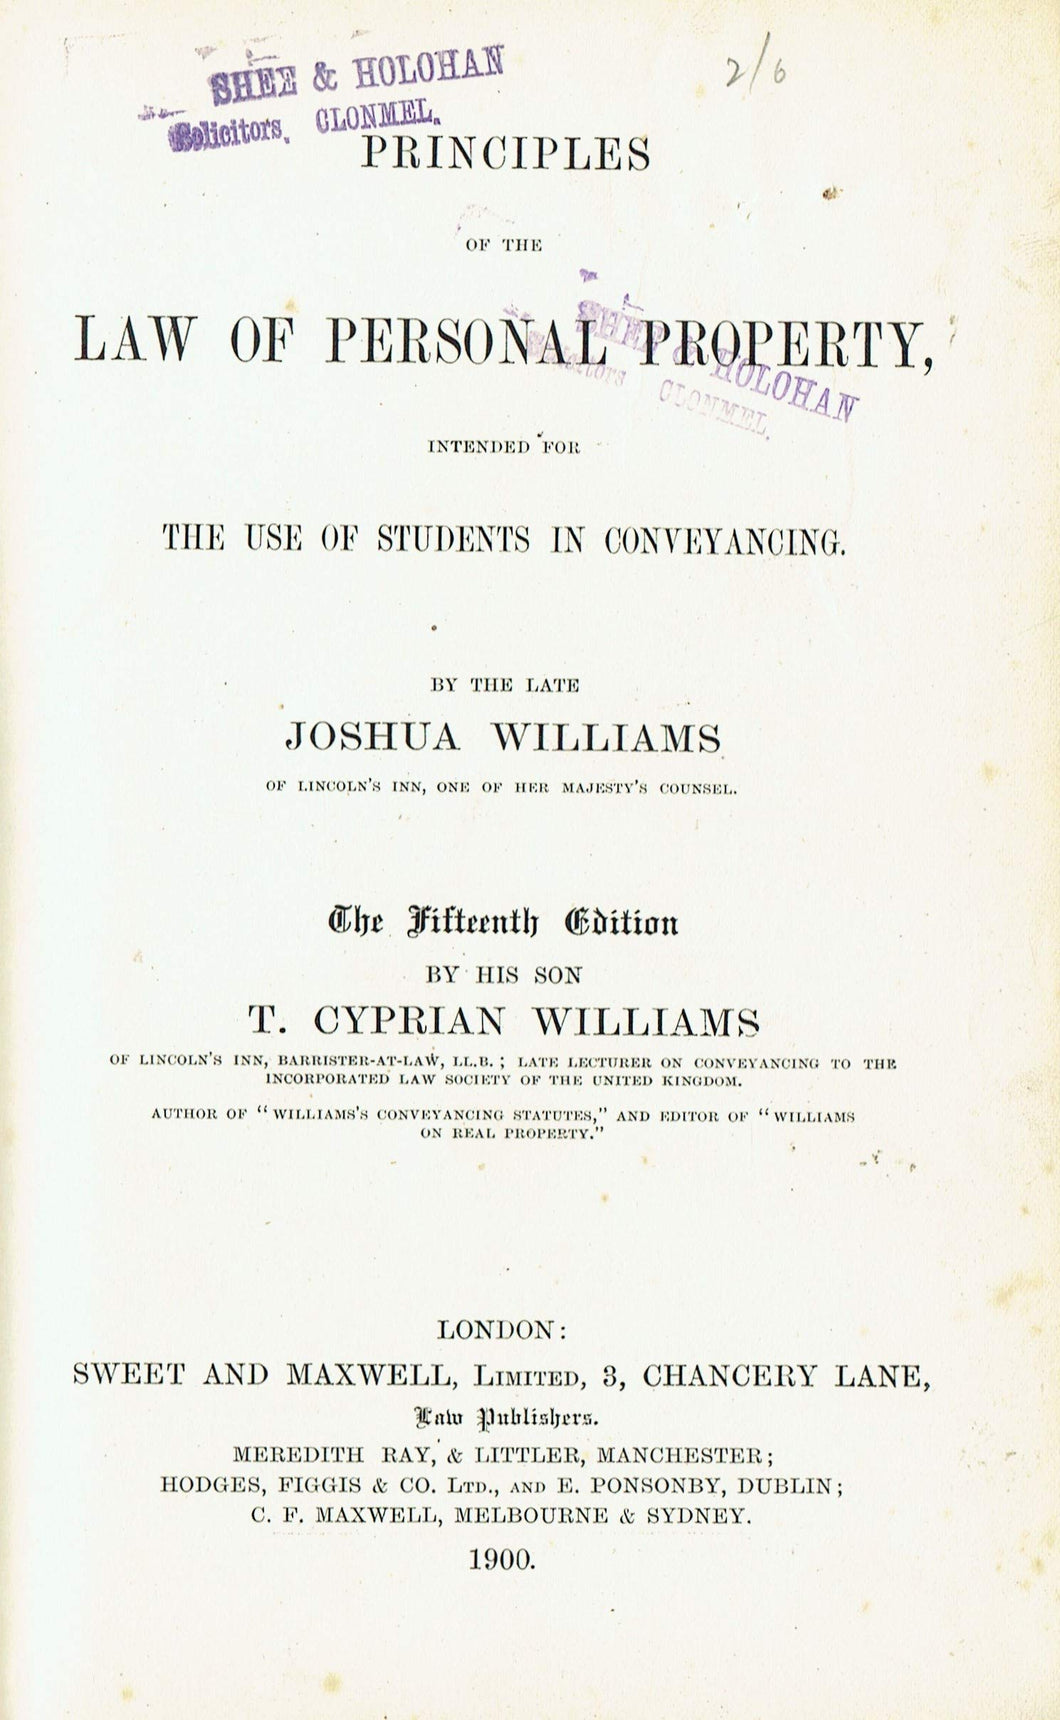 Williams on Personal Property (15th edition) - Principles of the Law of Personal Property, Intended for the Use of Students in Conveyancing